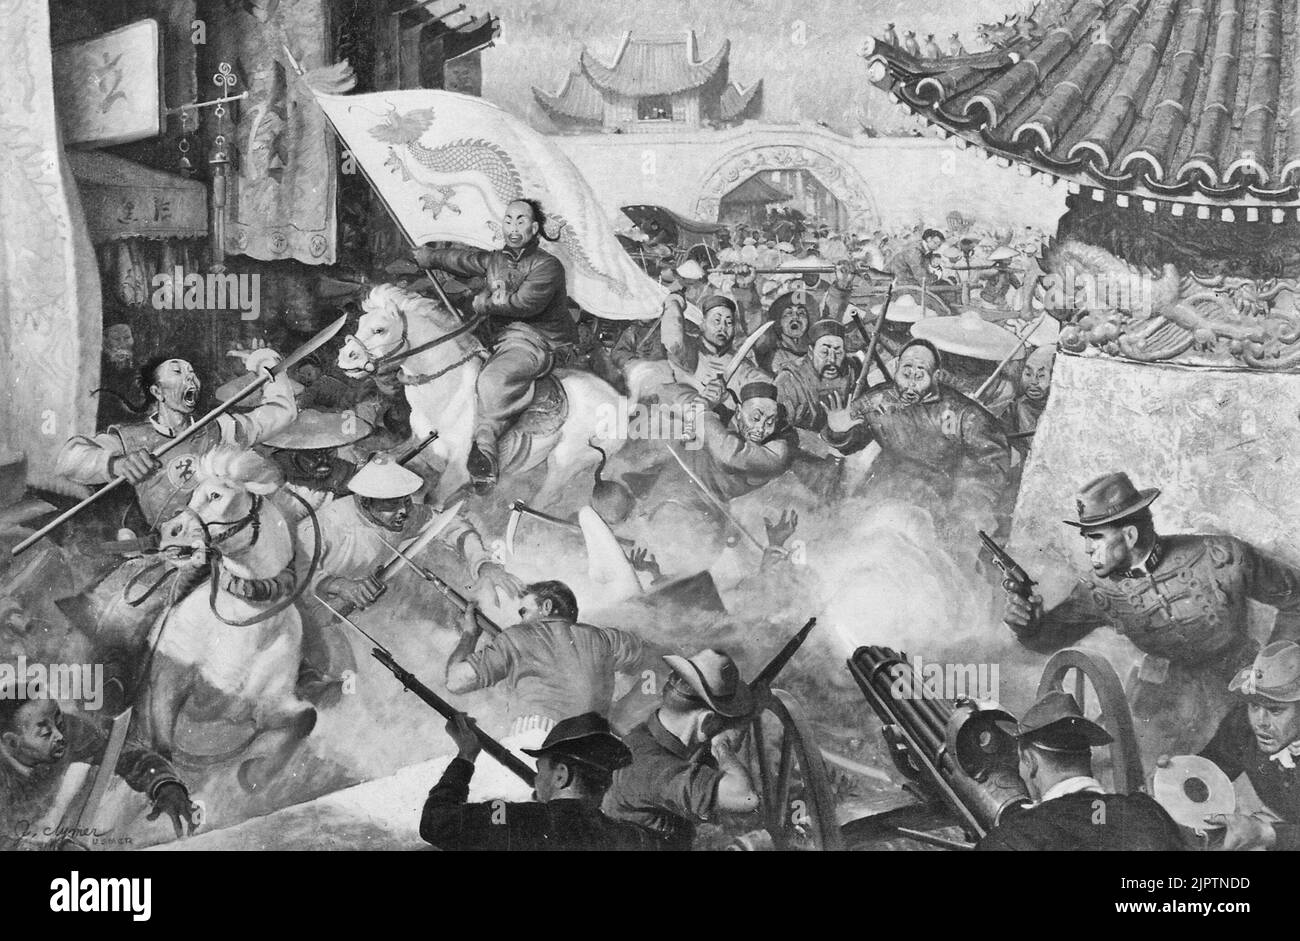 Marines fight rebellous Boxers outside Peking Legation, 1900 - Painting by Sergeant John Clymer Stockfoto